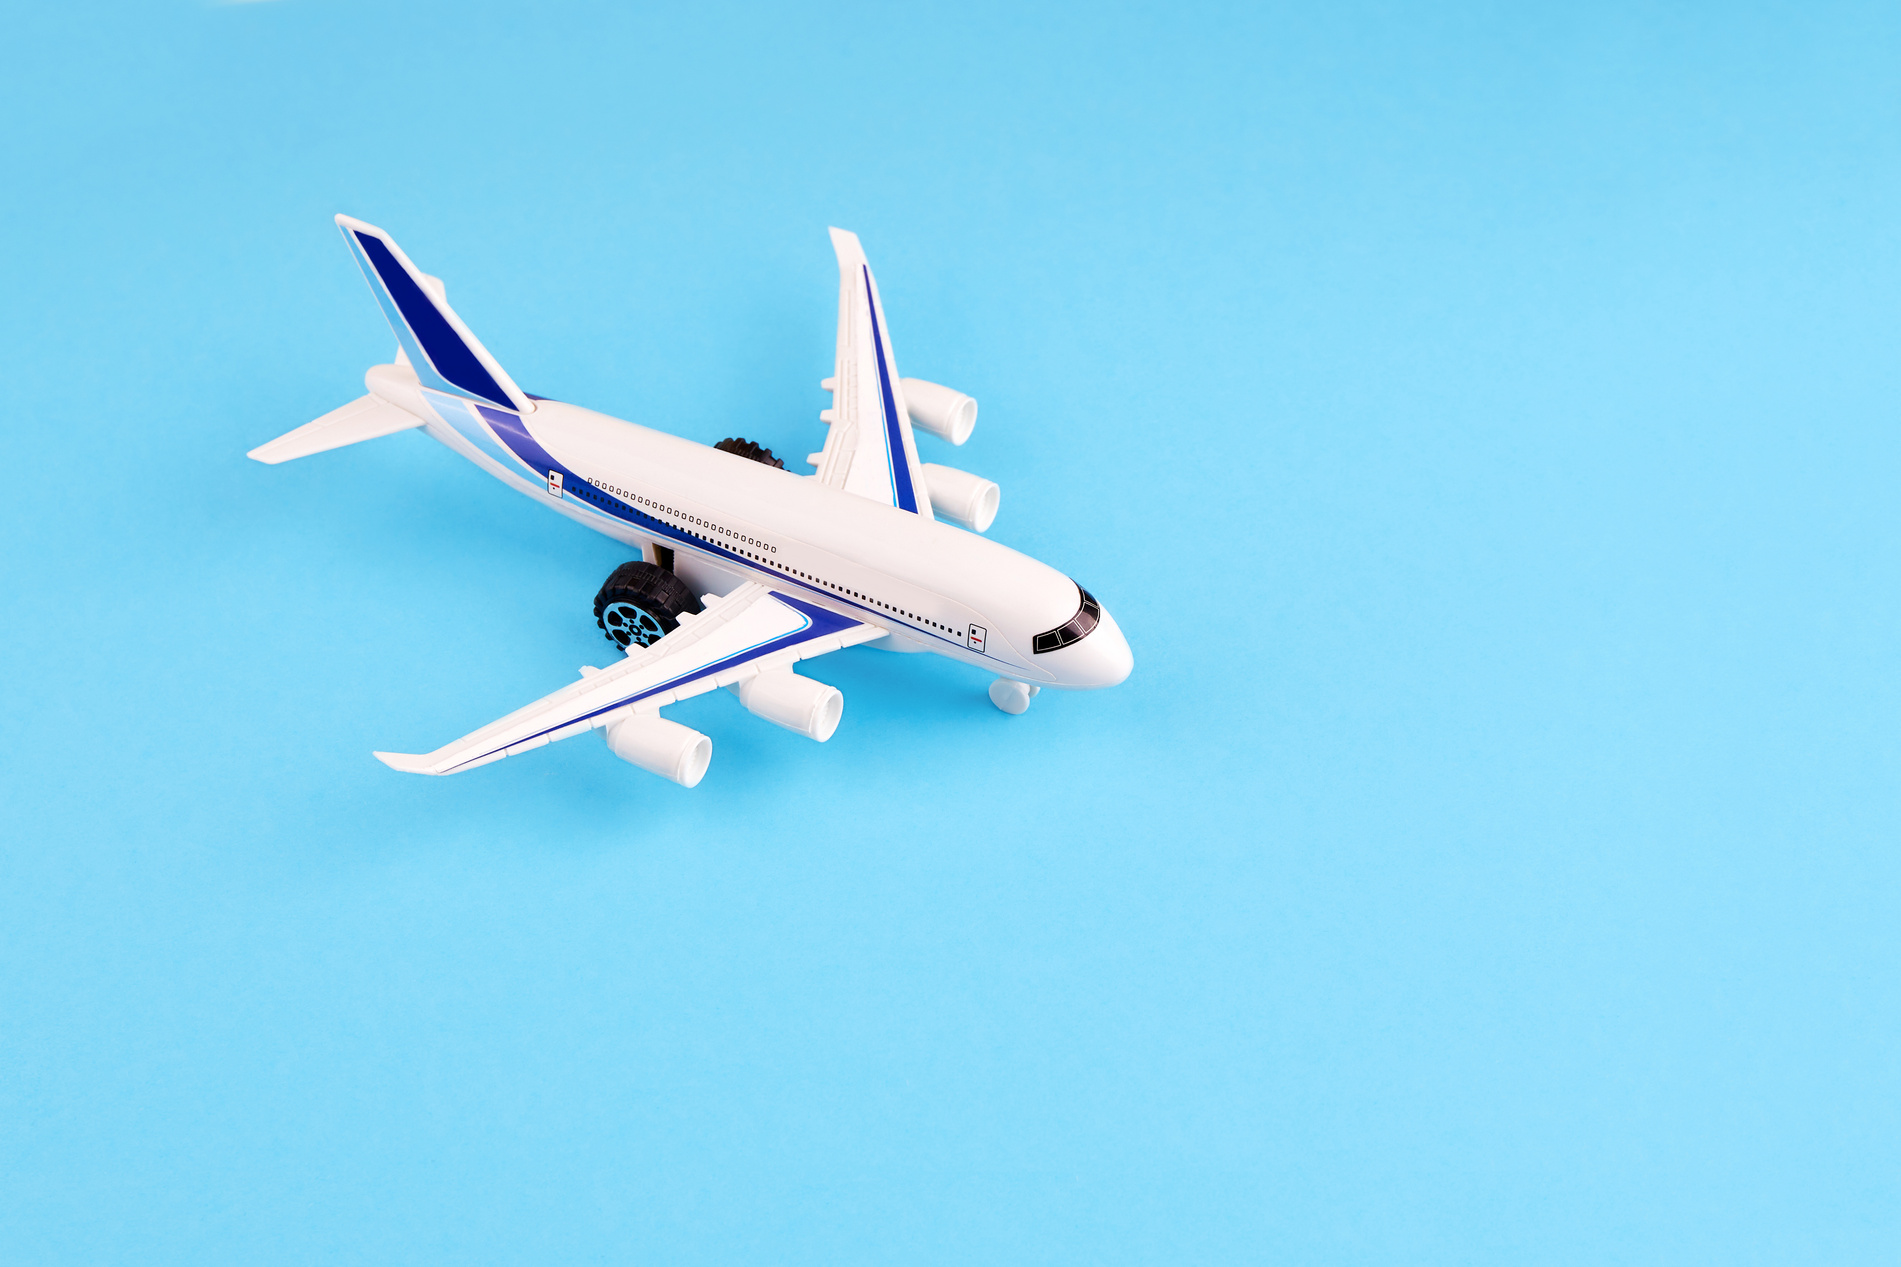 Airplane toy on blue background.